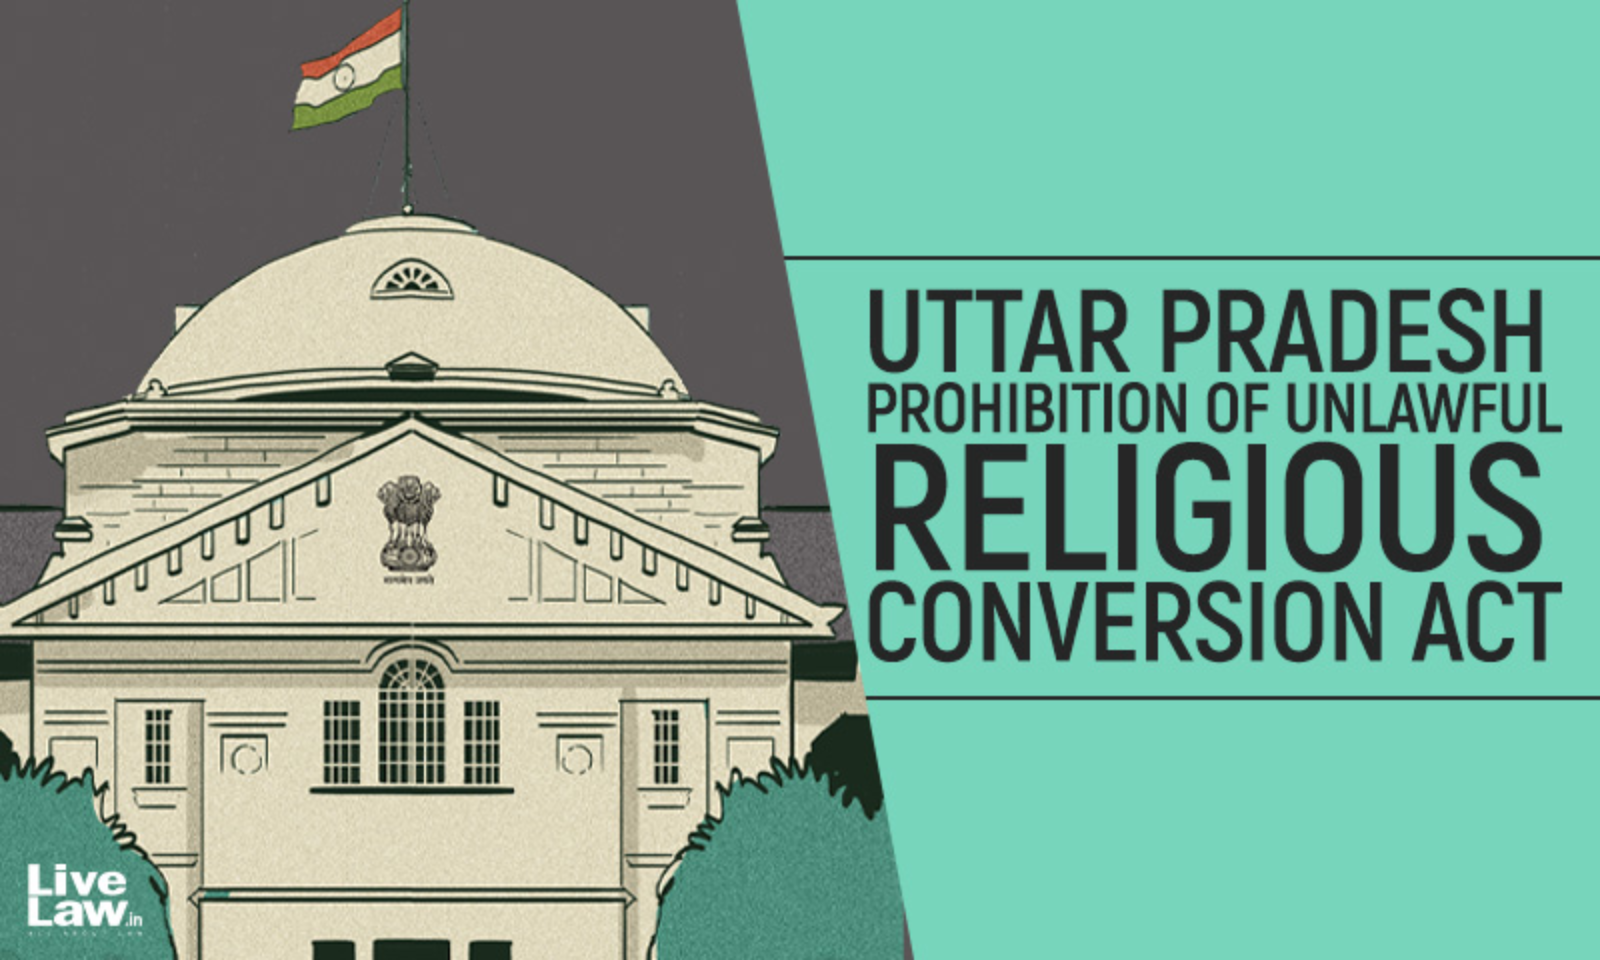 Prima Facie S. 3 & 5 Of UP's 'Anti Conversion' Law Aren't Glaringly Unconstitutional: Allahabad HC Denies Relief To 'SHUATS' VC